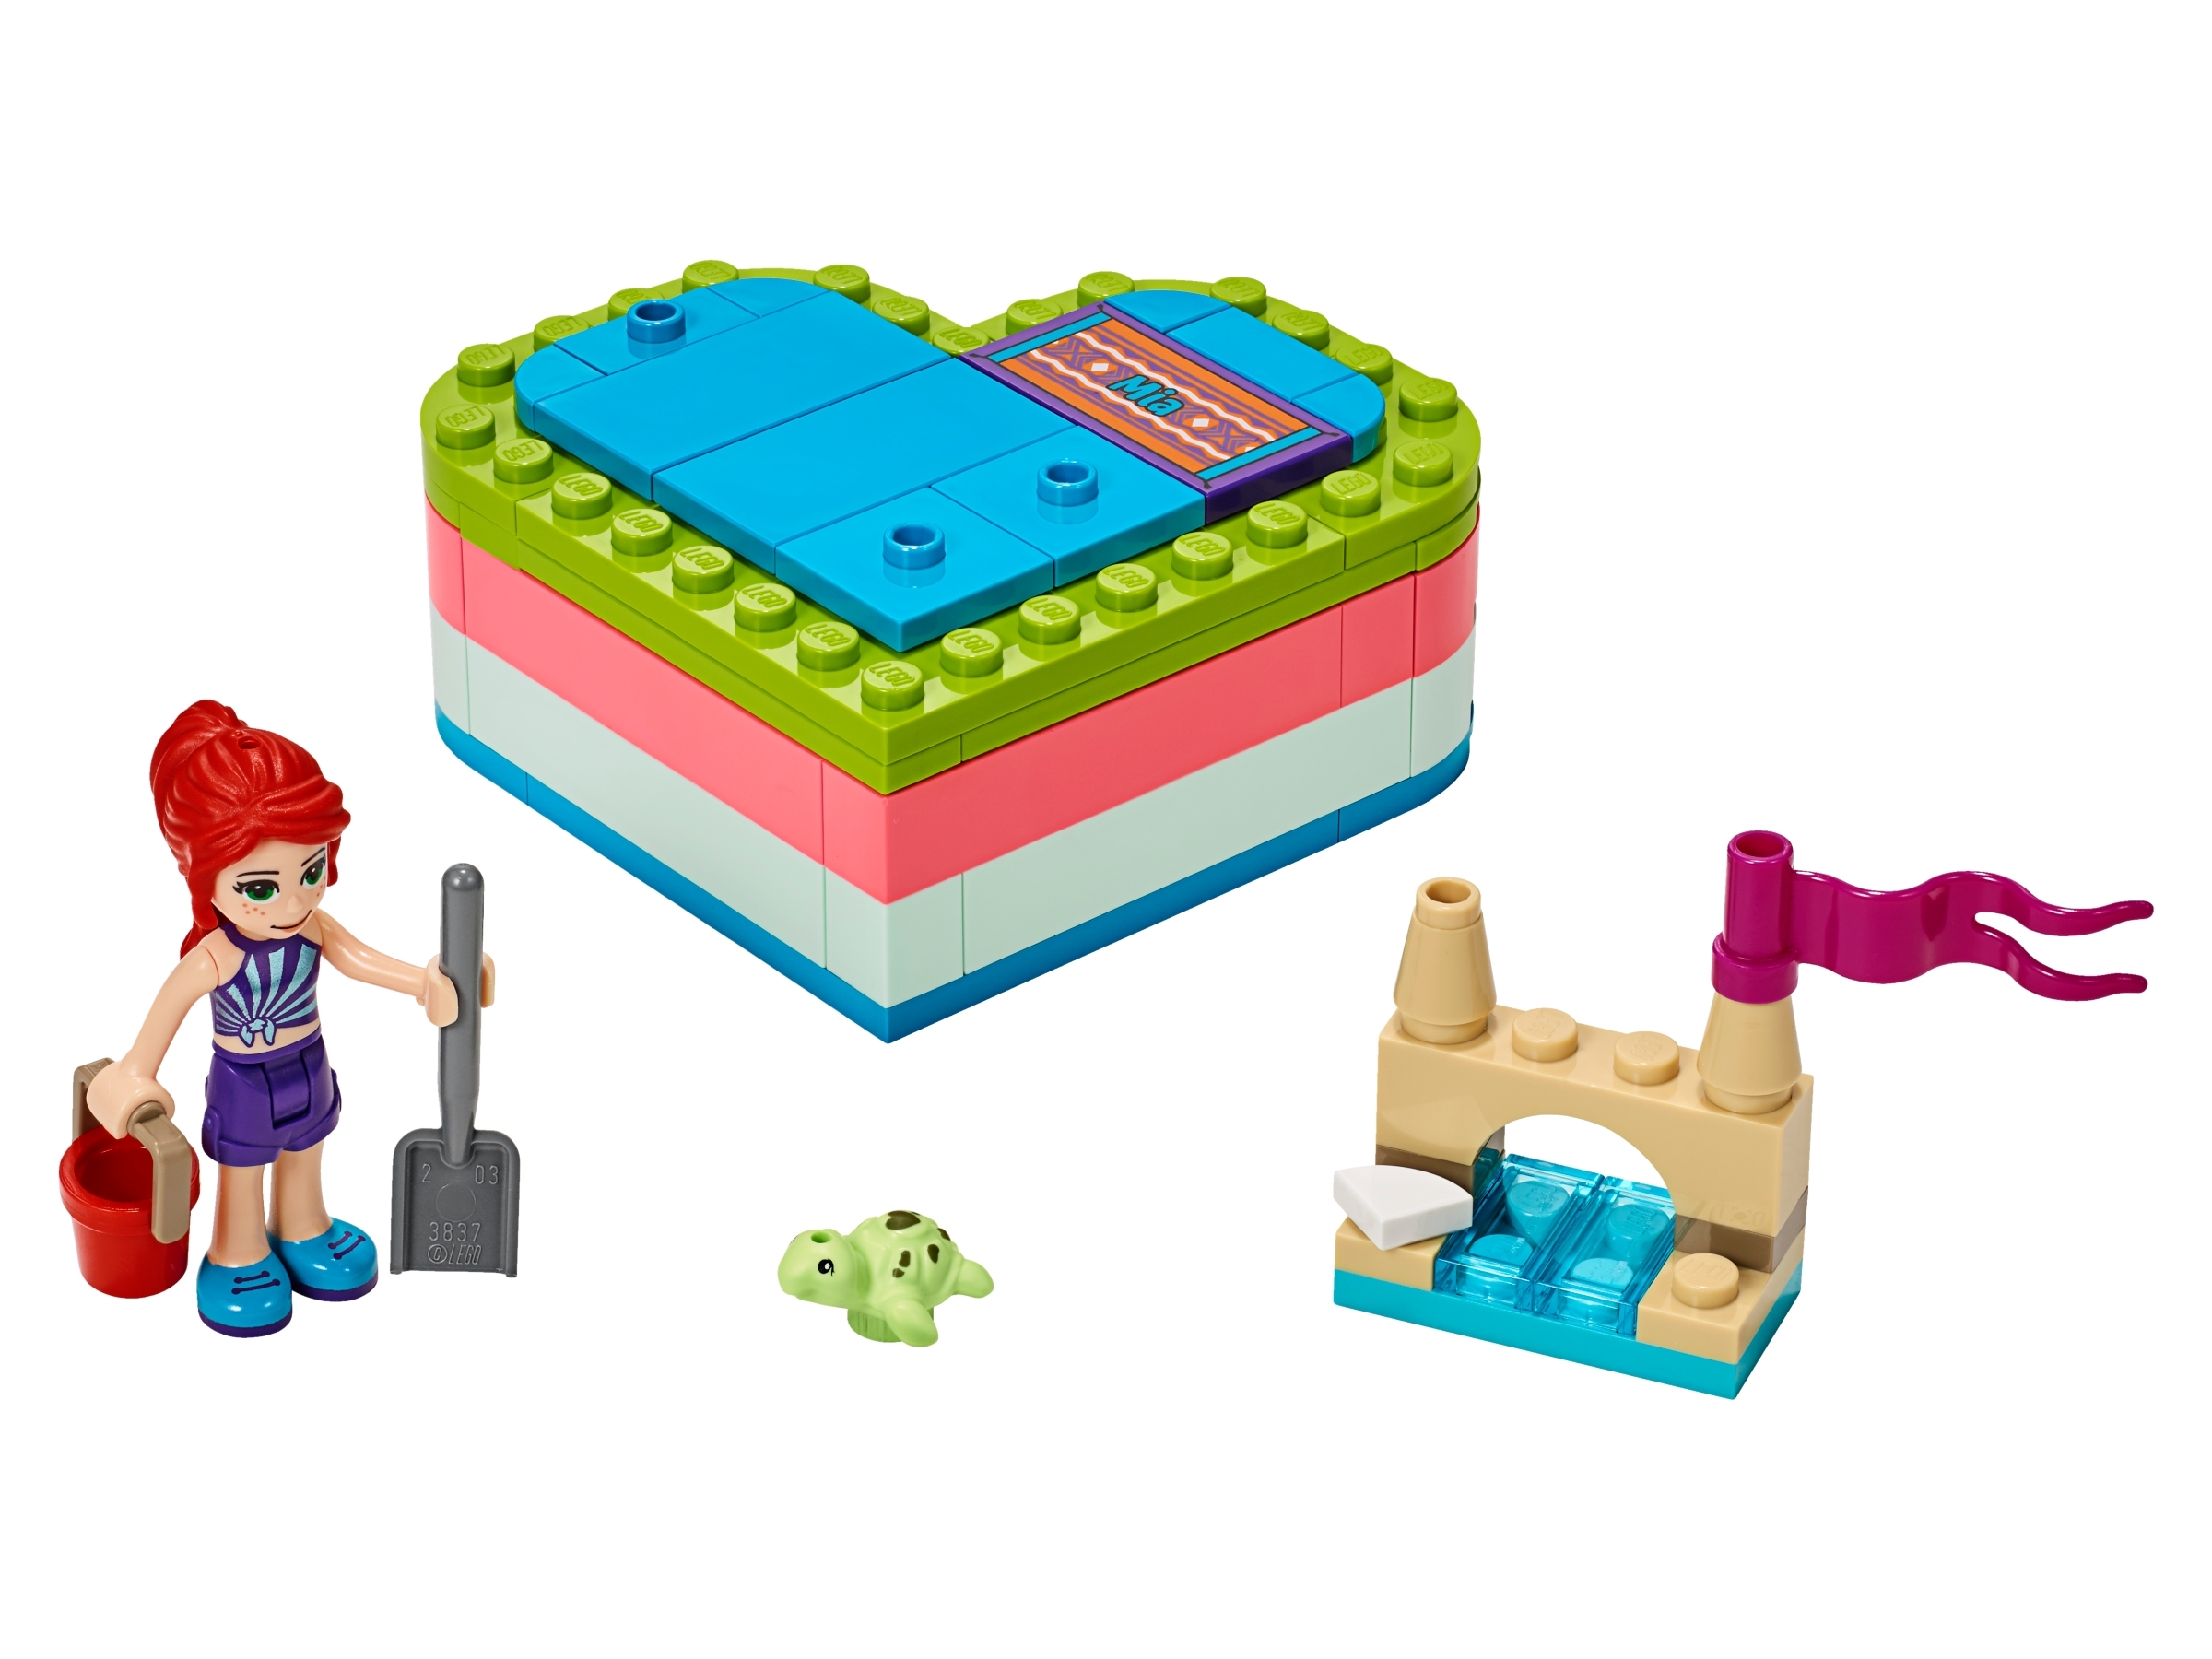 Mia's Summer Heart Box 41388 | Friends Buy online at the Official LEGO® US